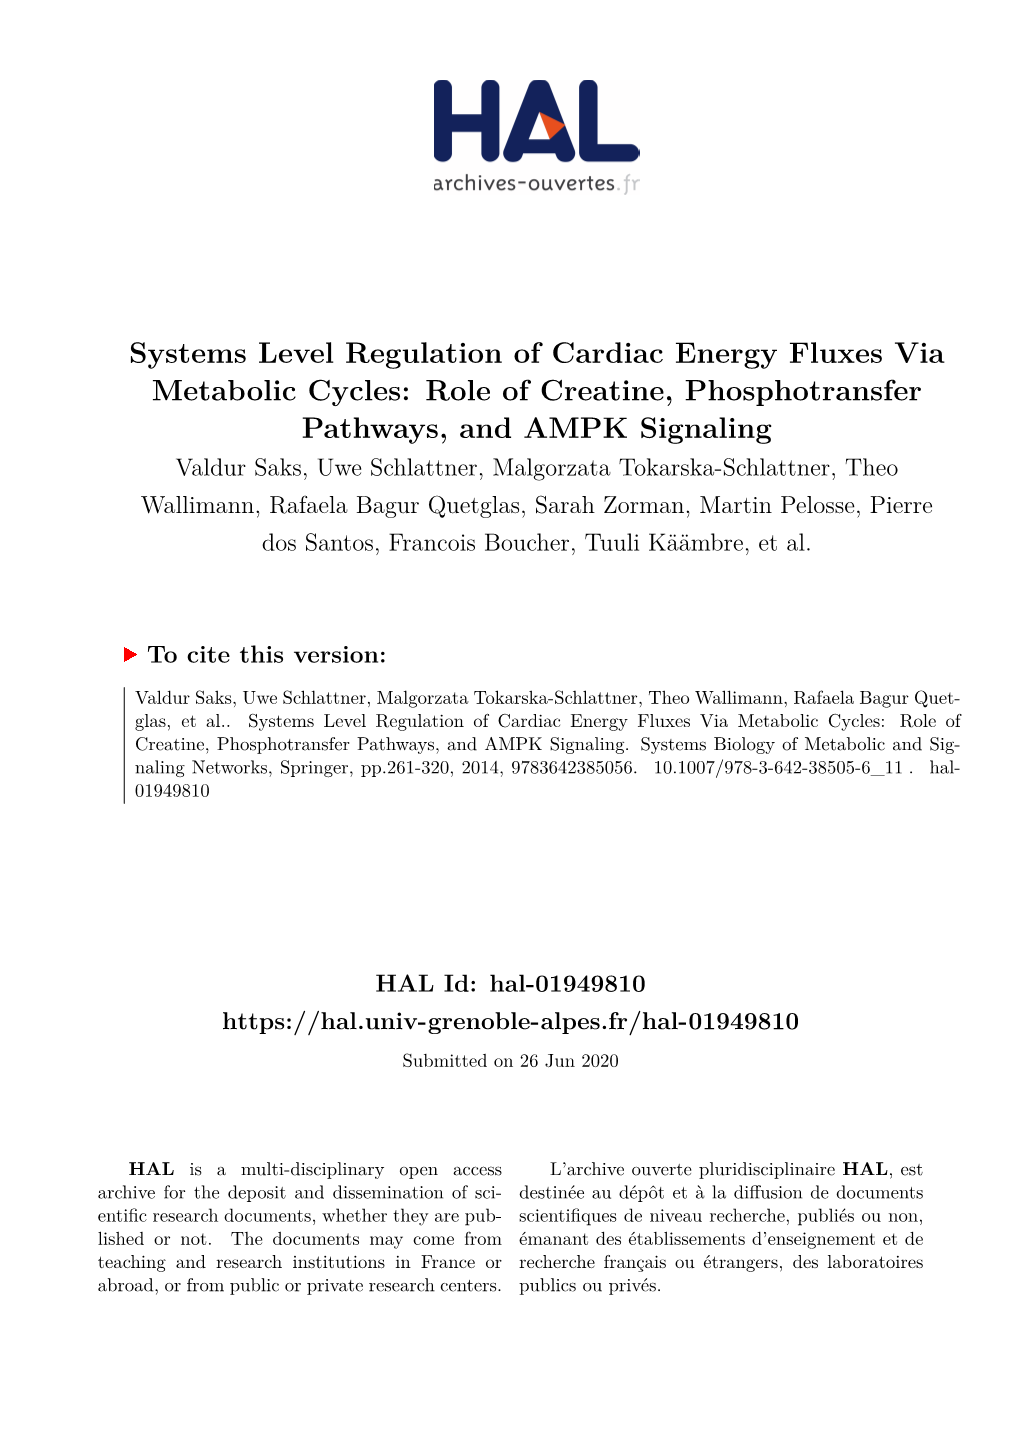 Systems Level Regulation of Cardiac Energy Fluxes Via Metabolic Cycles